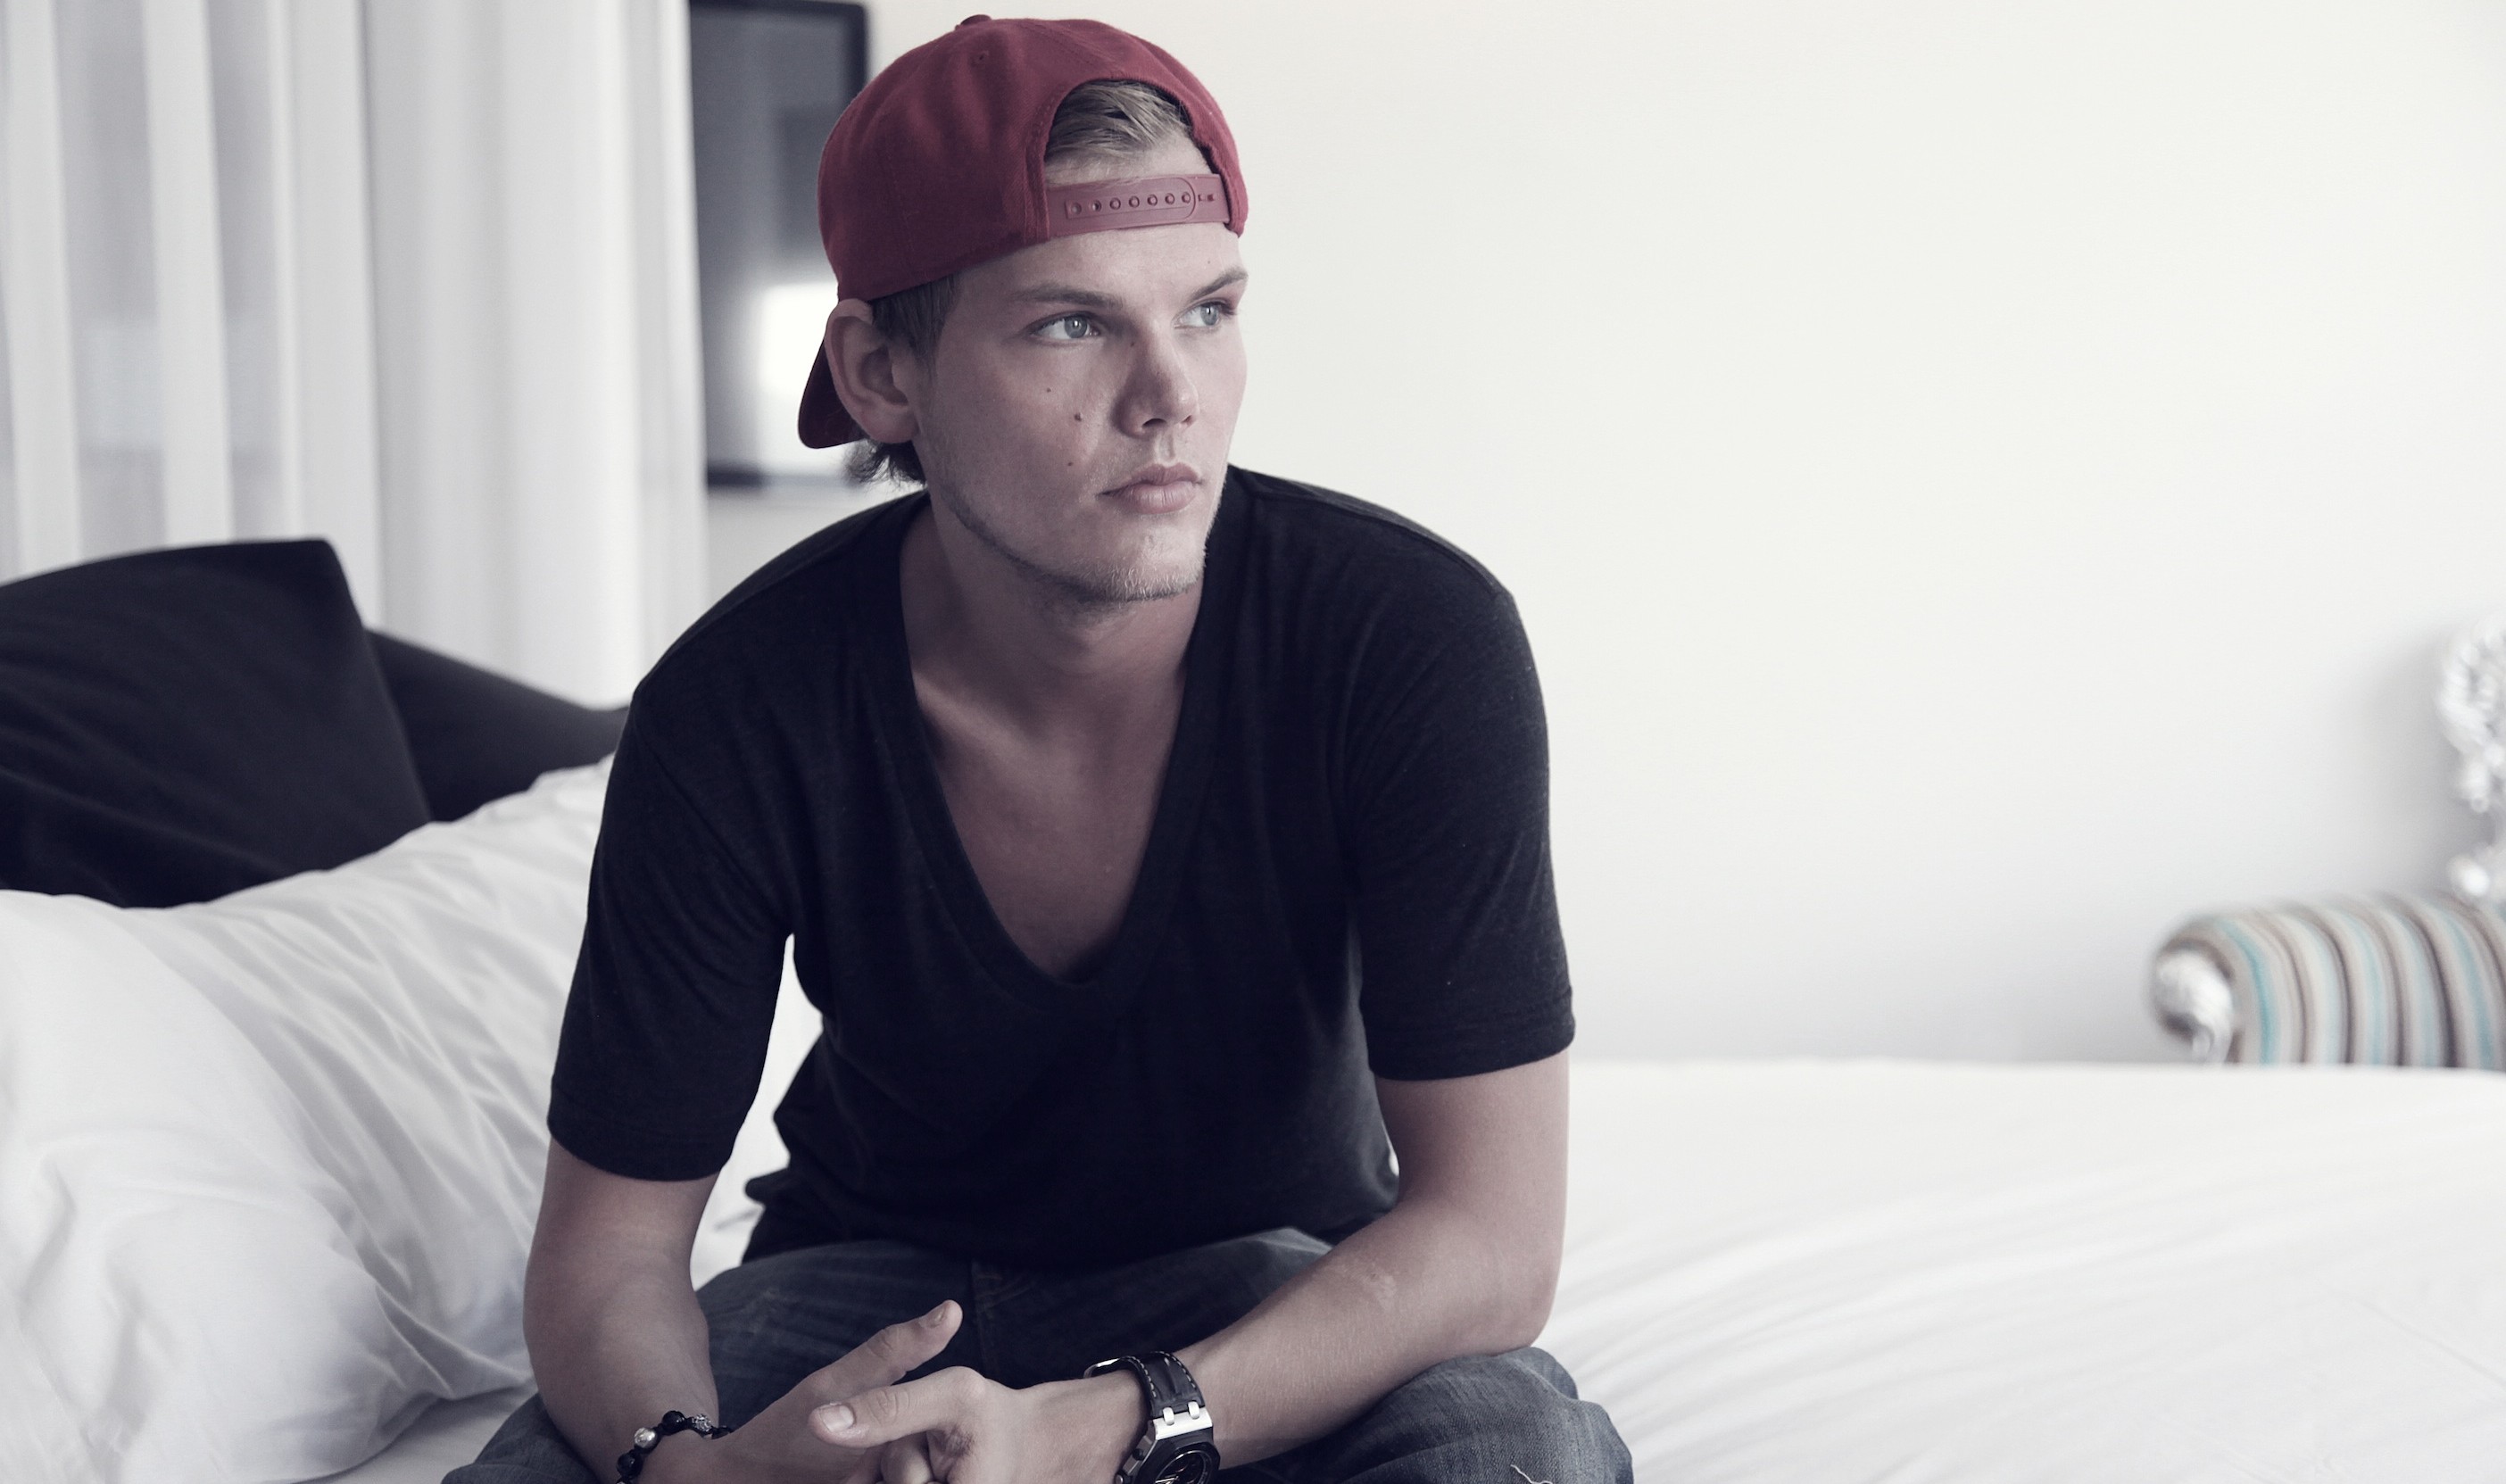 19x1080 Tim Bergling Avicii Musician 1080p Laptop Full Hd Wallpaper Hd Music 4k Wallpapers Images Photos And Background Wallpapers Den